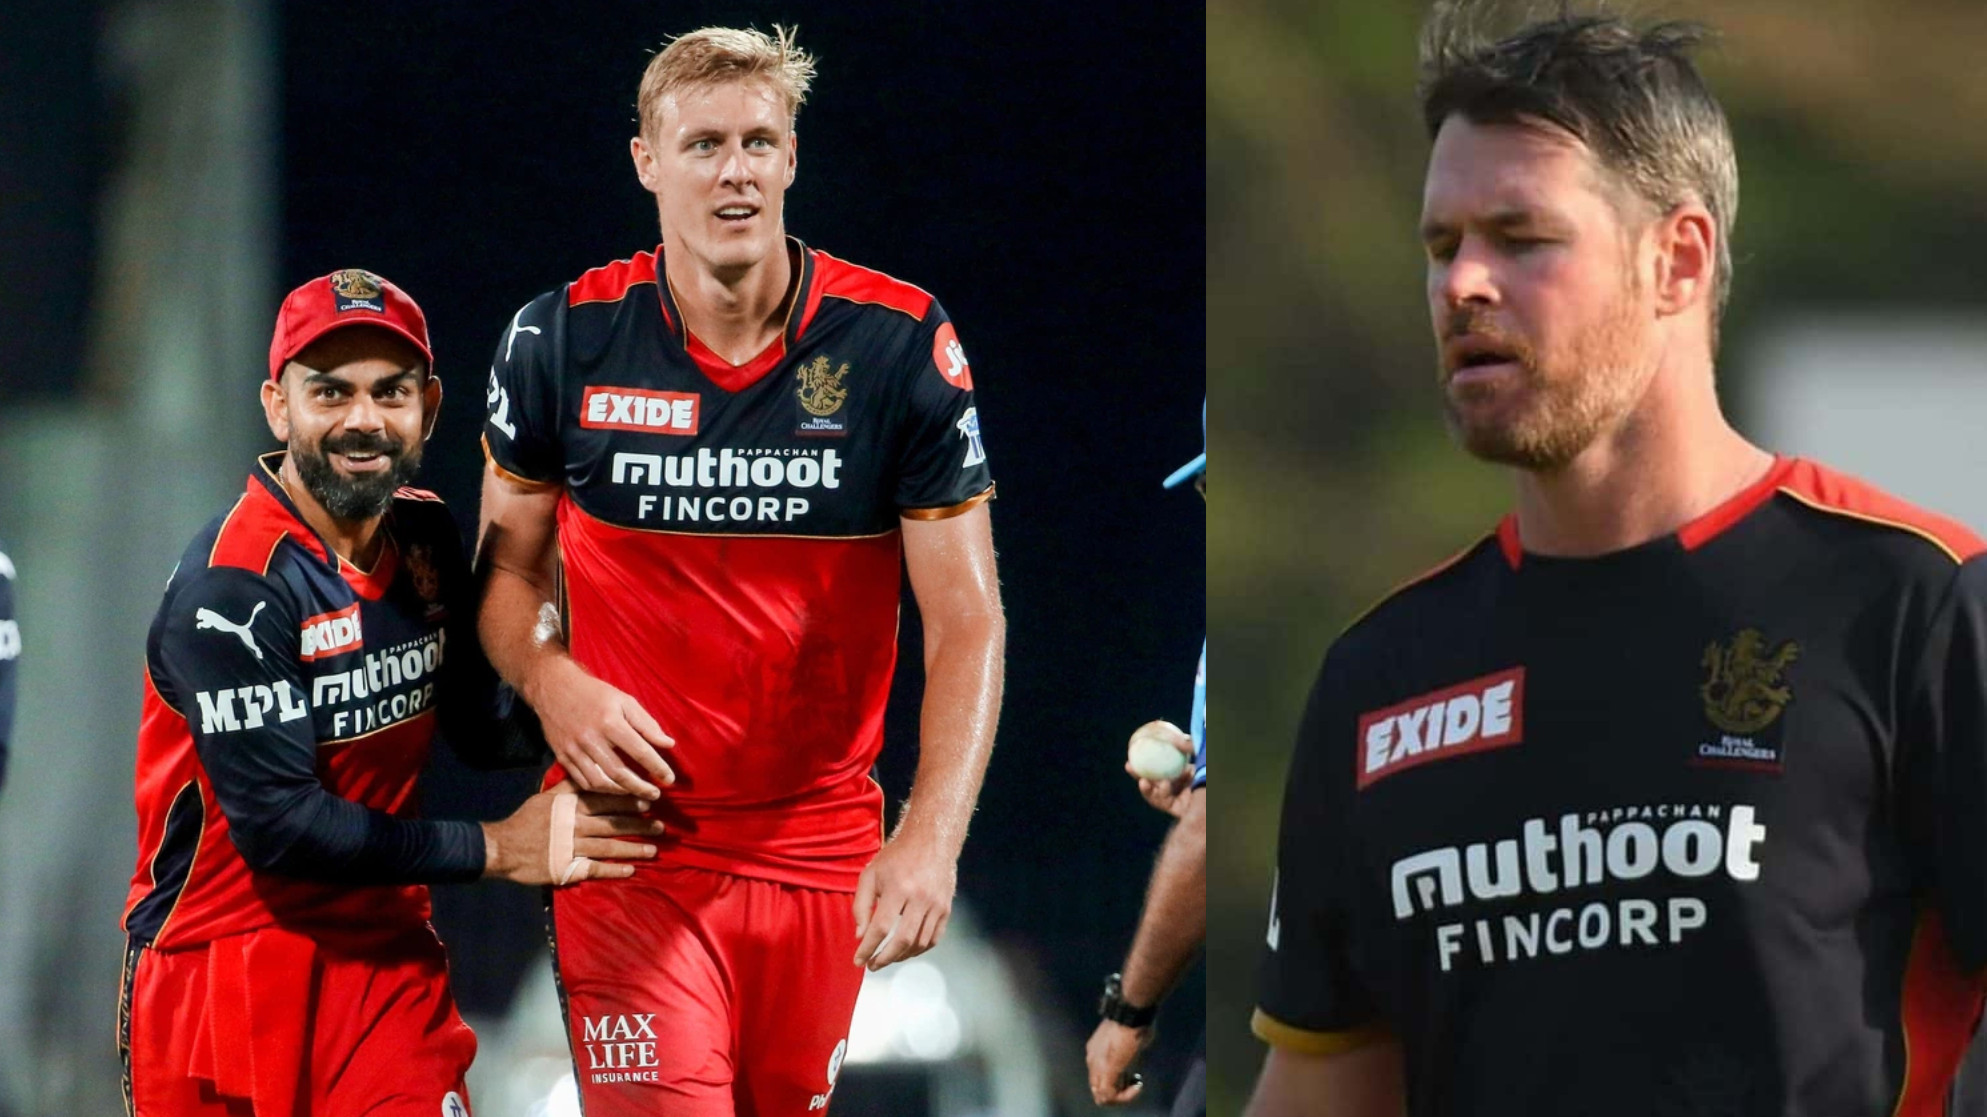 IPL 2021: Dan added stuff to make it good- Jamieson on story of him refusing to bowl to Kohli with Dukes ball in RCB nets